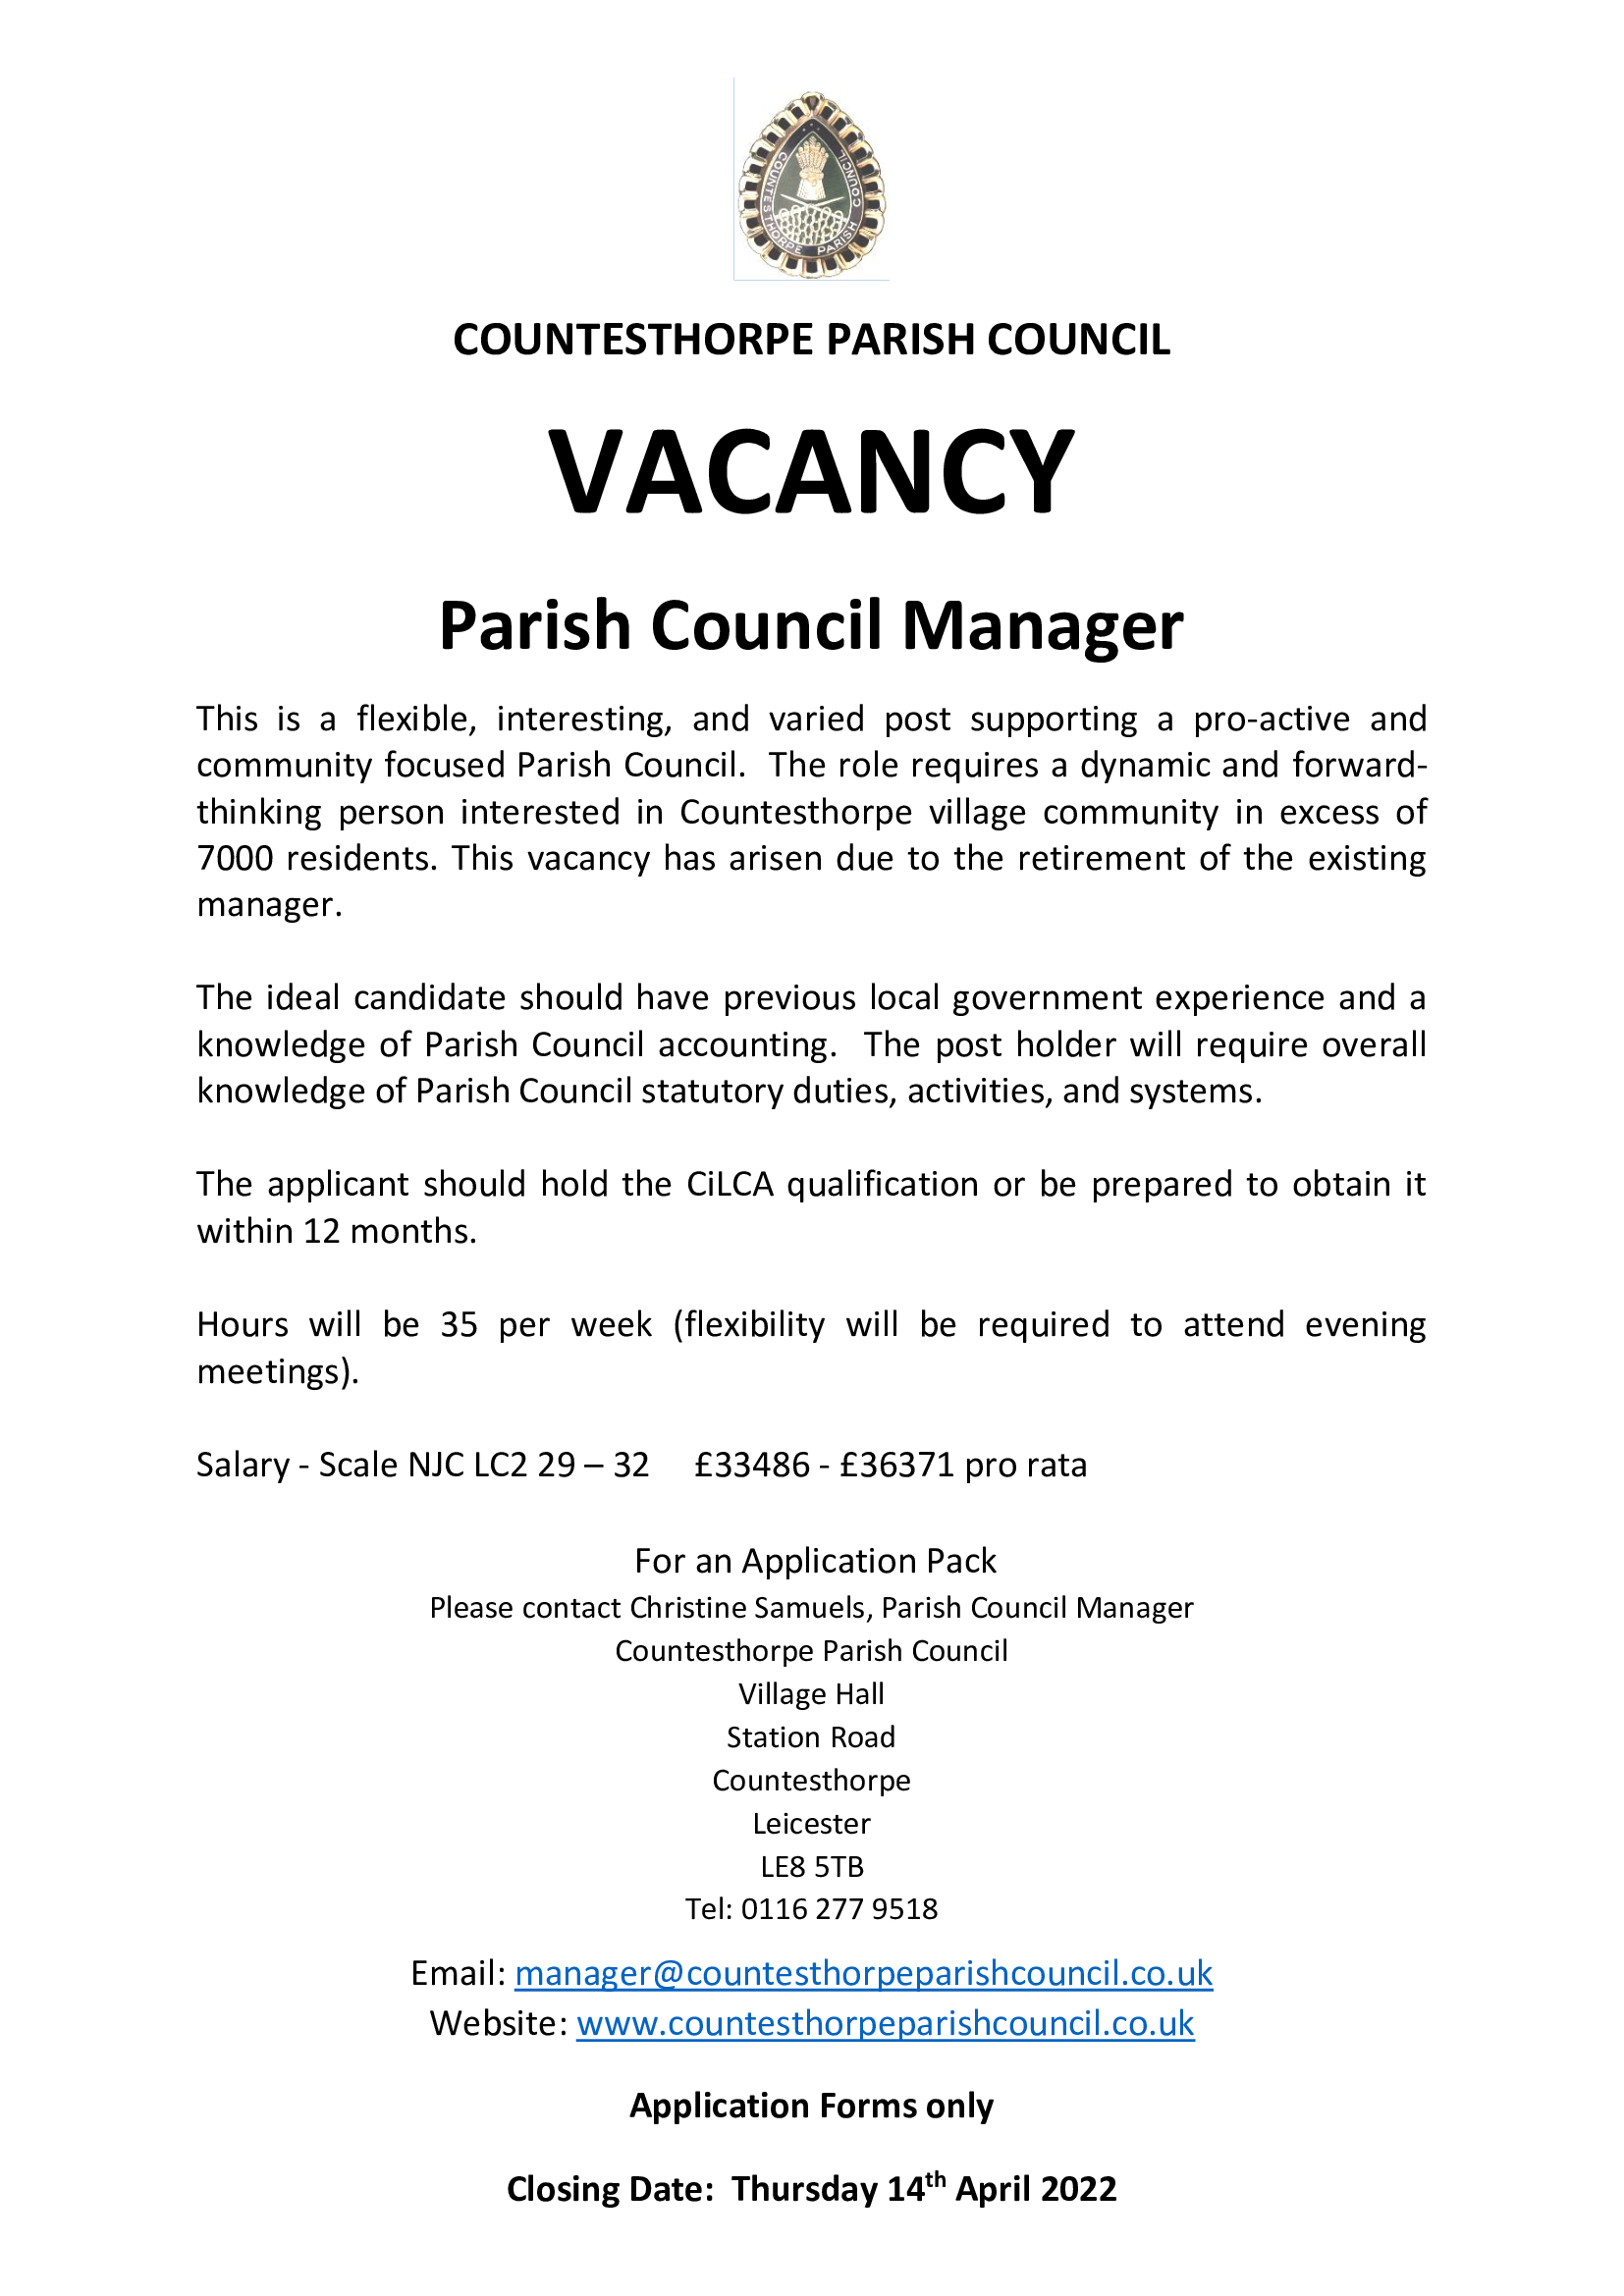 Vacancy for Manager